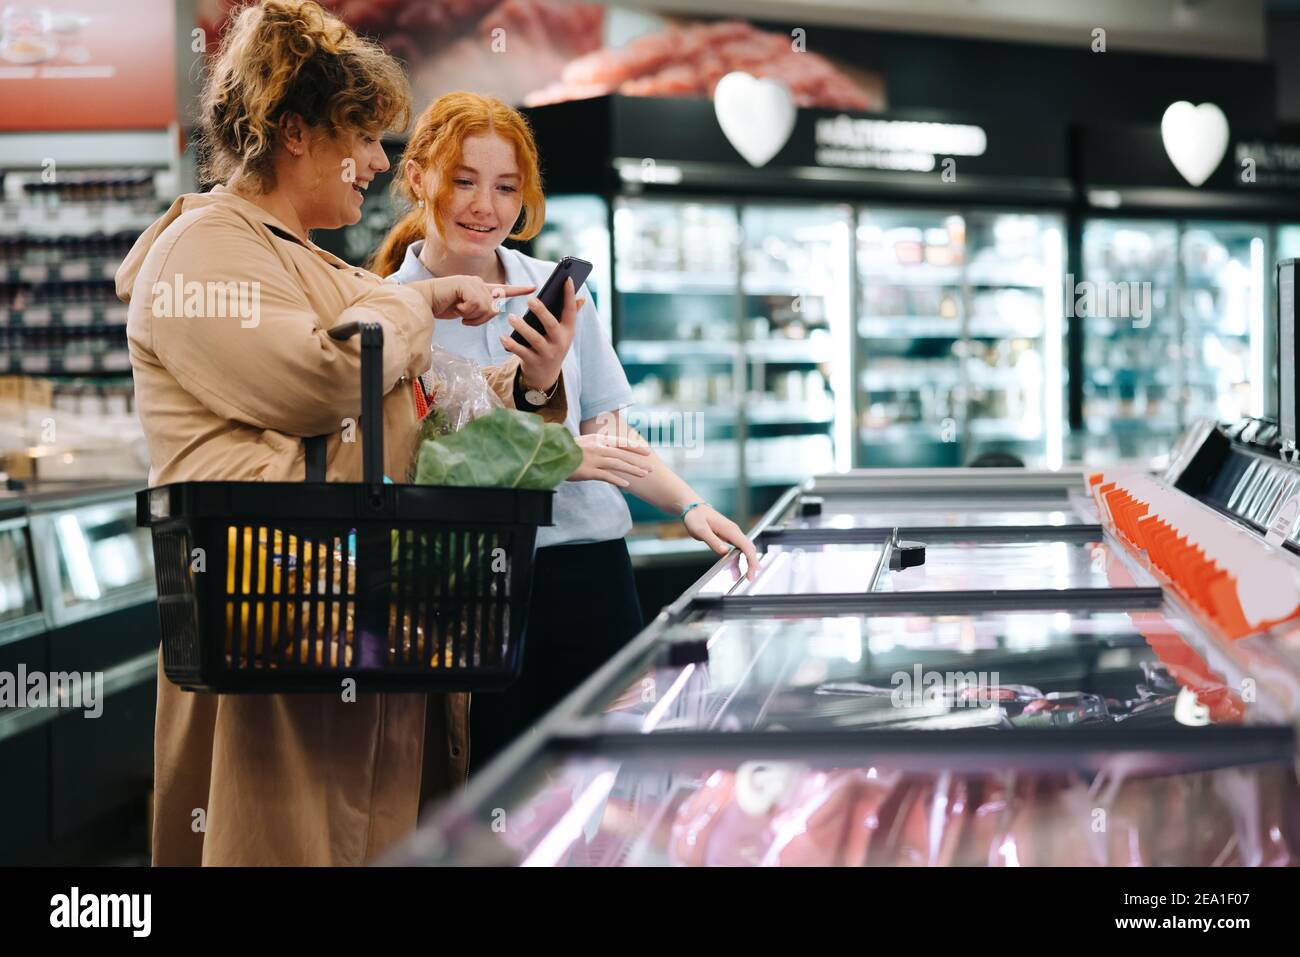 Female customer showing grocery list on her phone to a shop assistant. Shopper taking help from a female worker in supermarket. Stock Photo